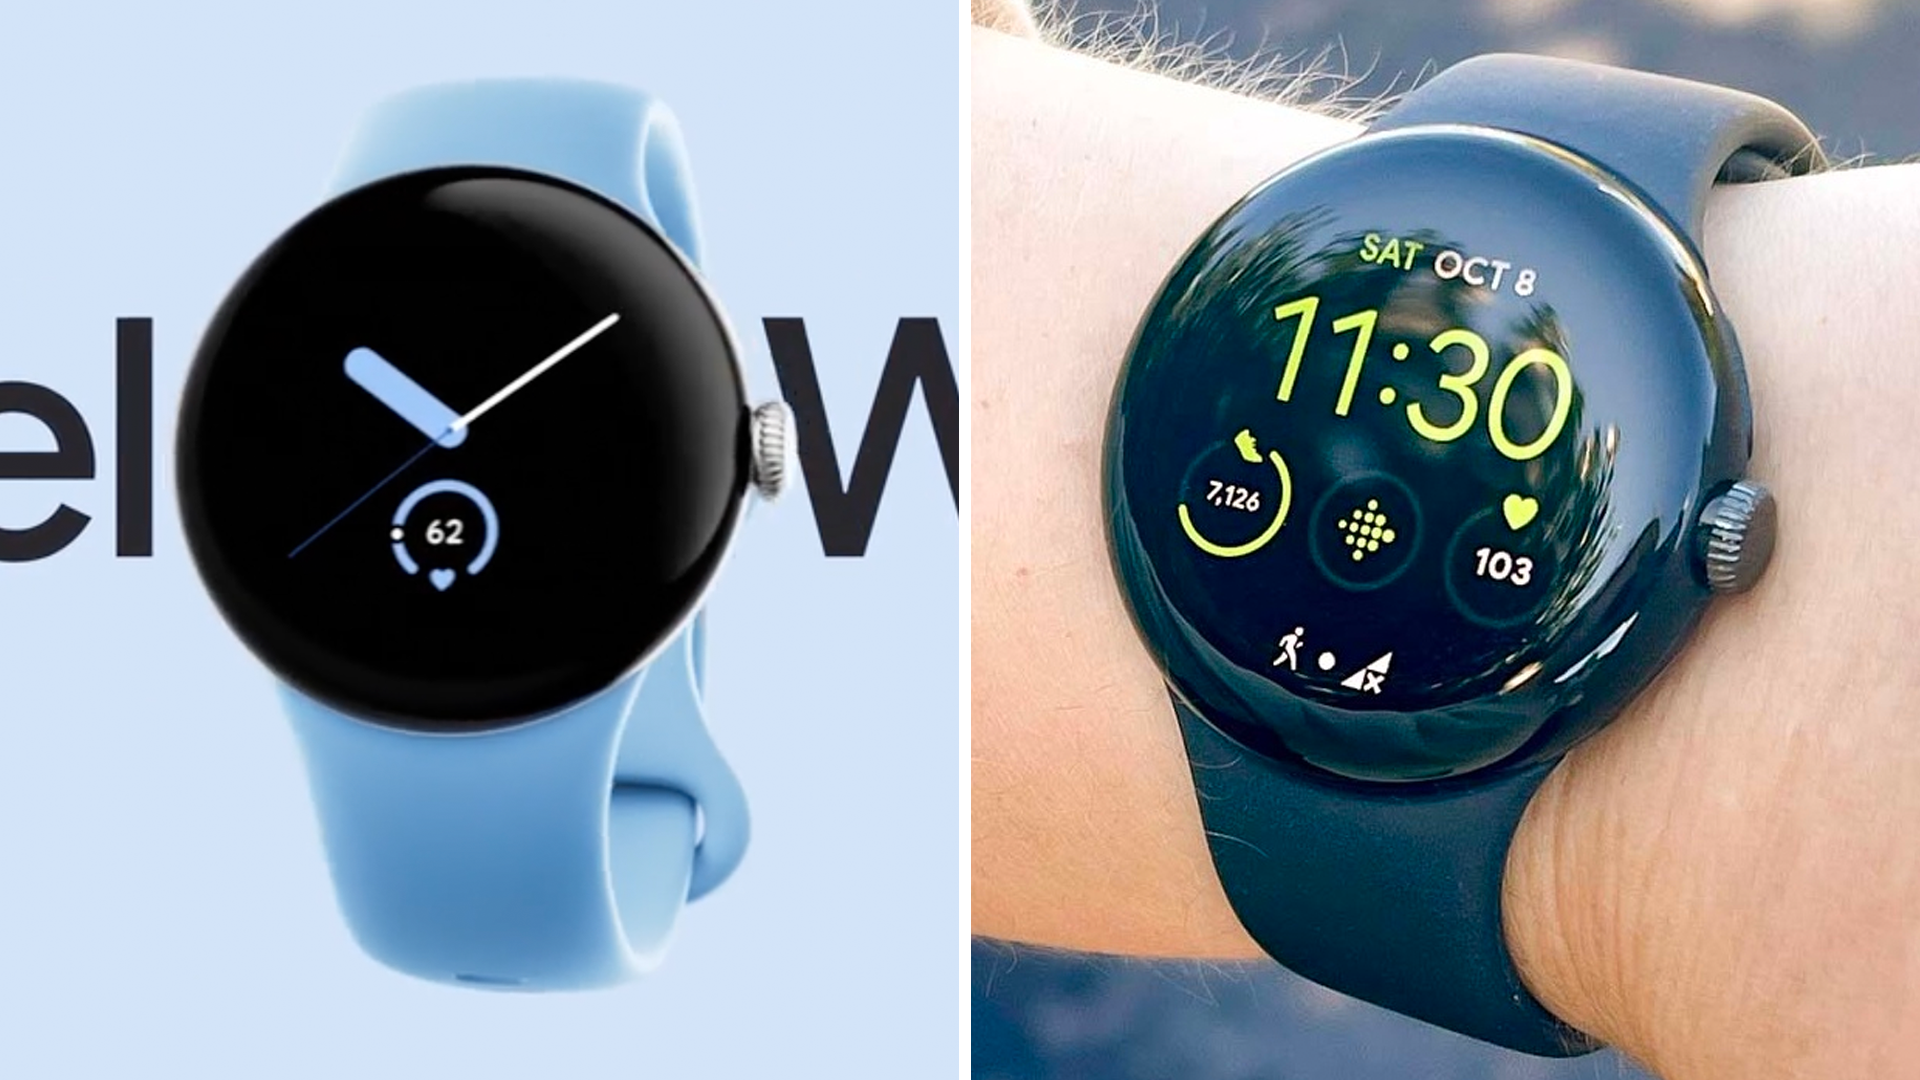 Google Pixel Watch 2 LTE vs Pixel Watch 2 Wi-Fi: What's the difference?